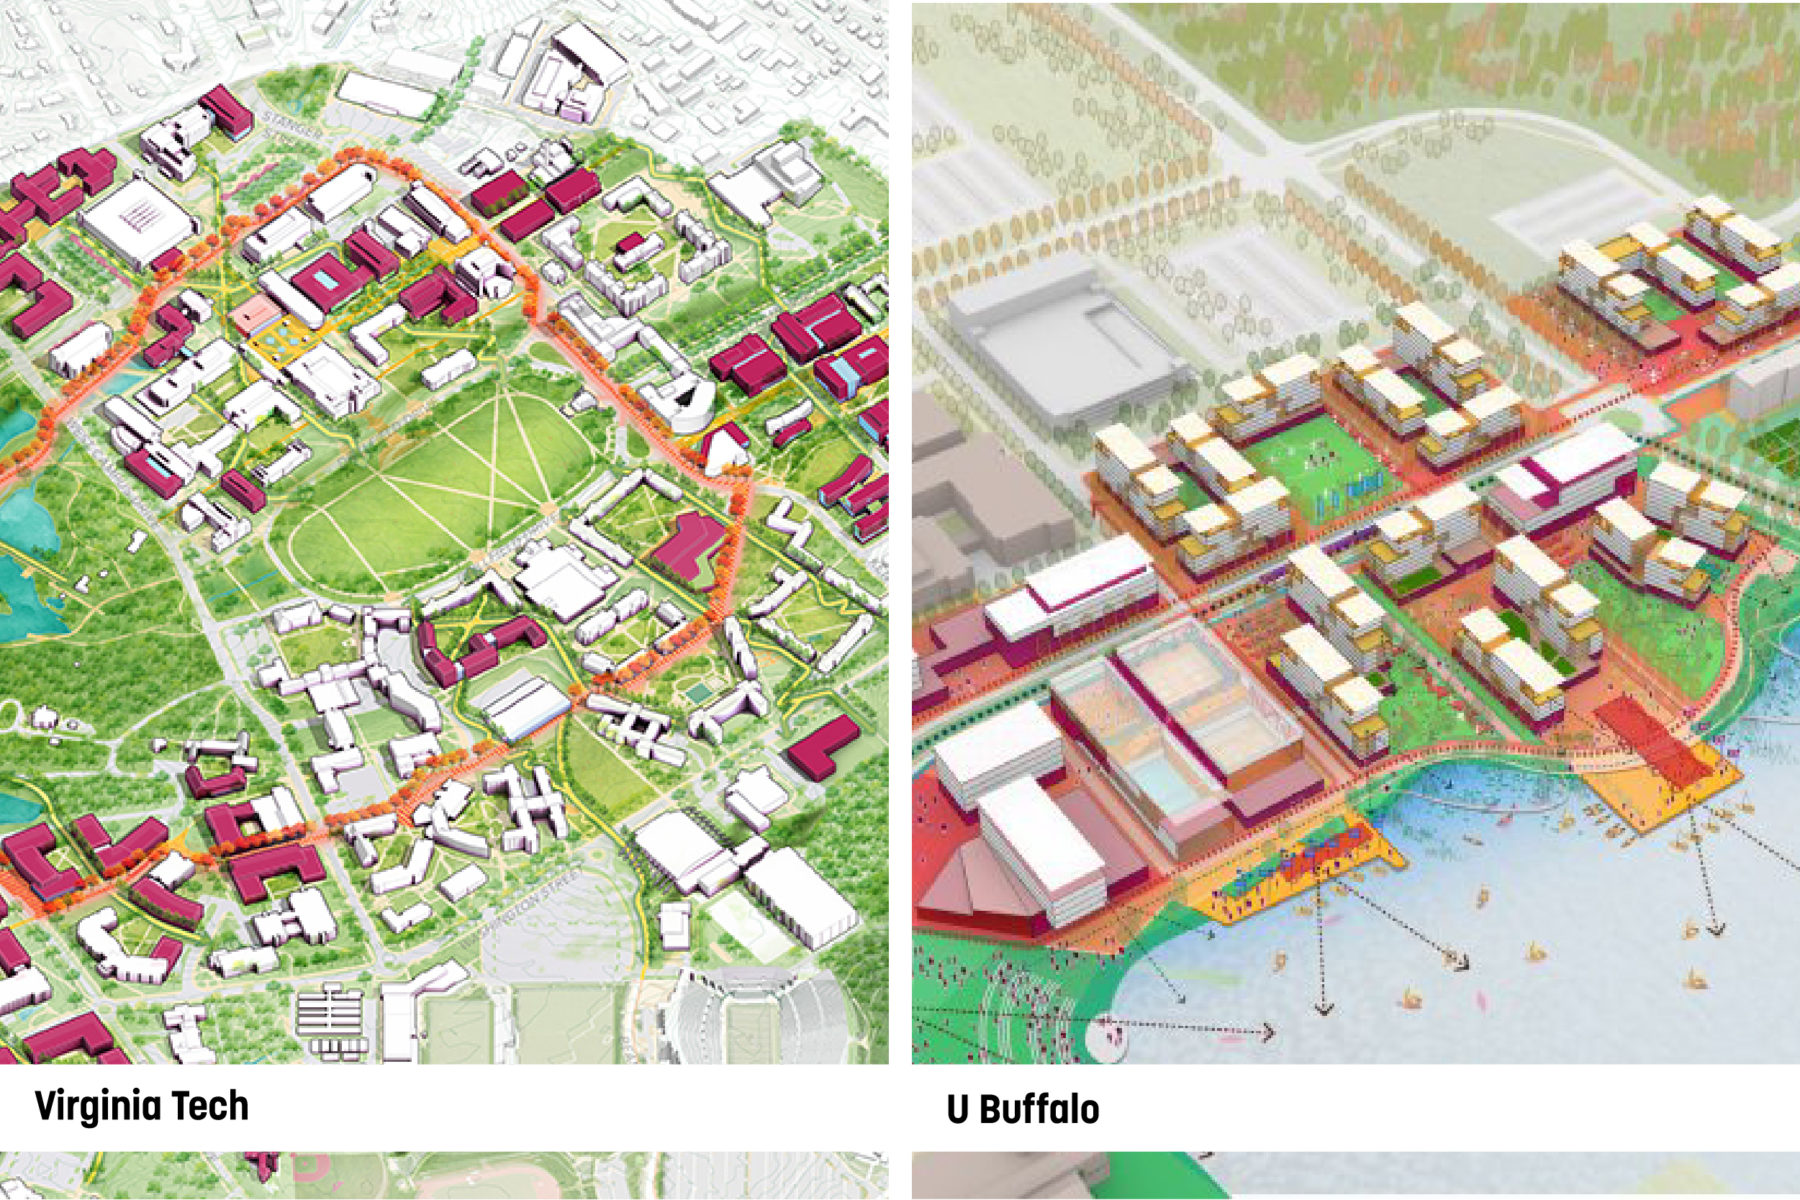 Plans for The Virginia Tech Campus Master Plan and the University at Buffalo, Housing Master Plan (North Campus)